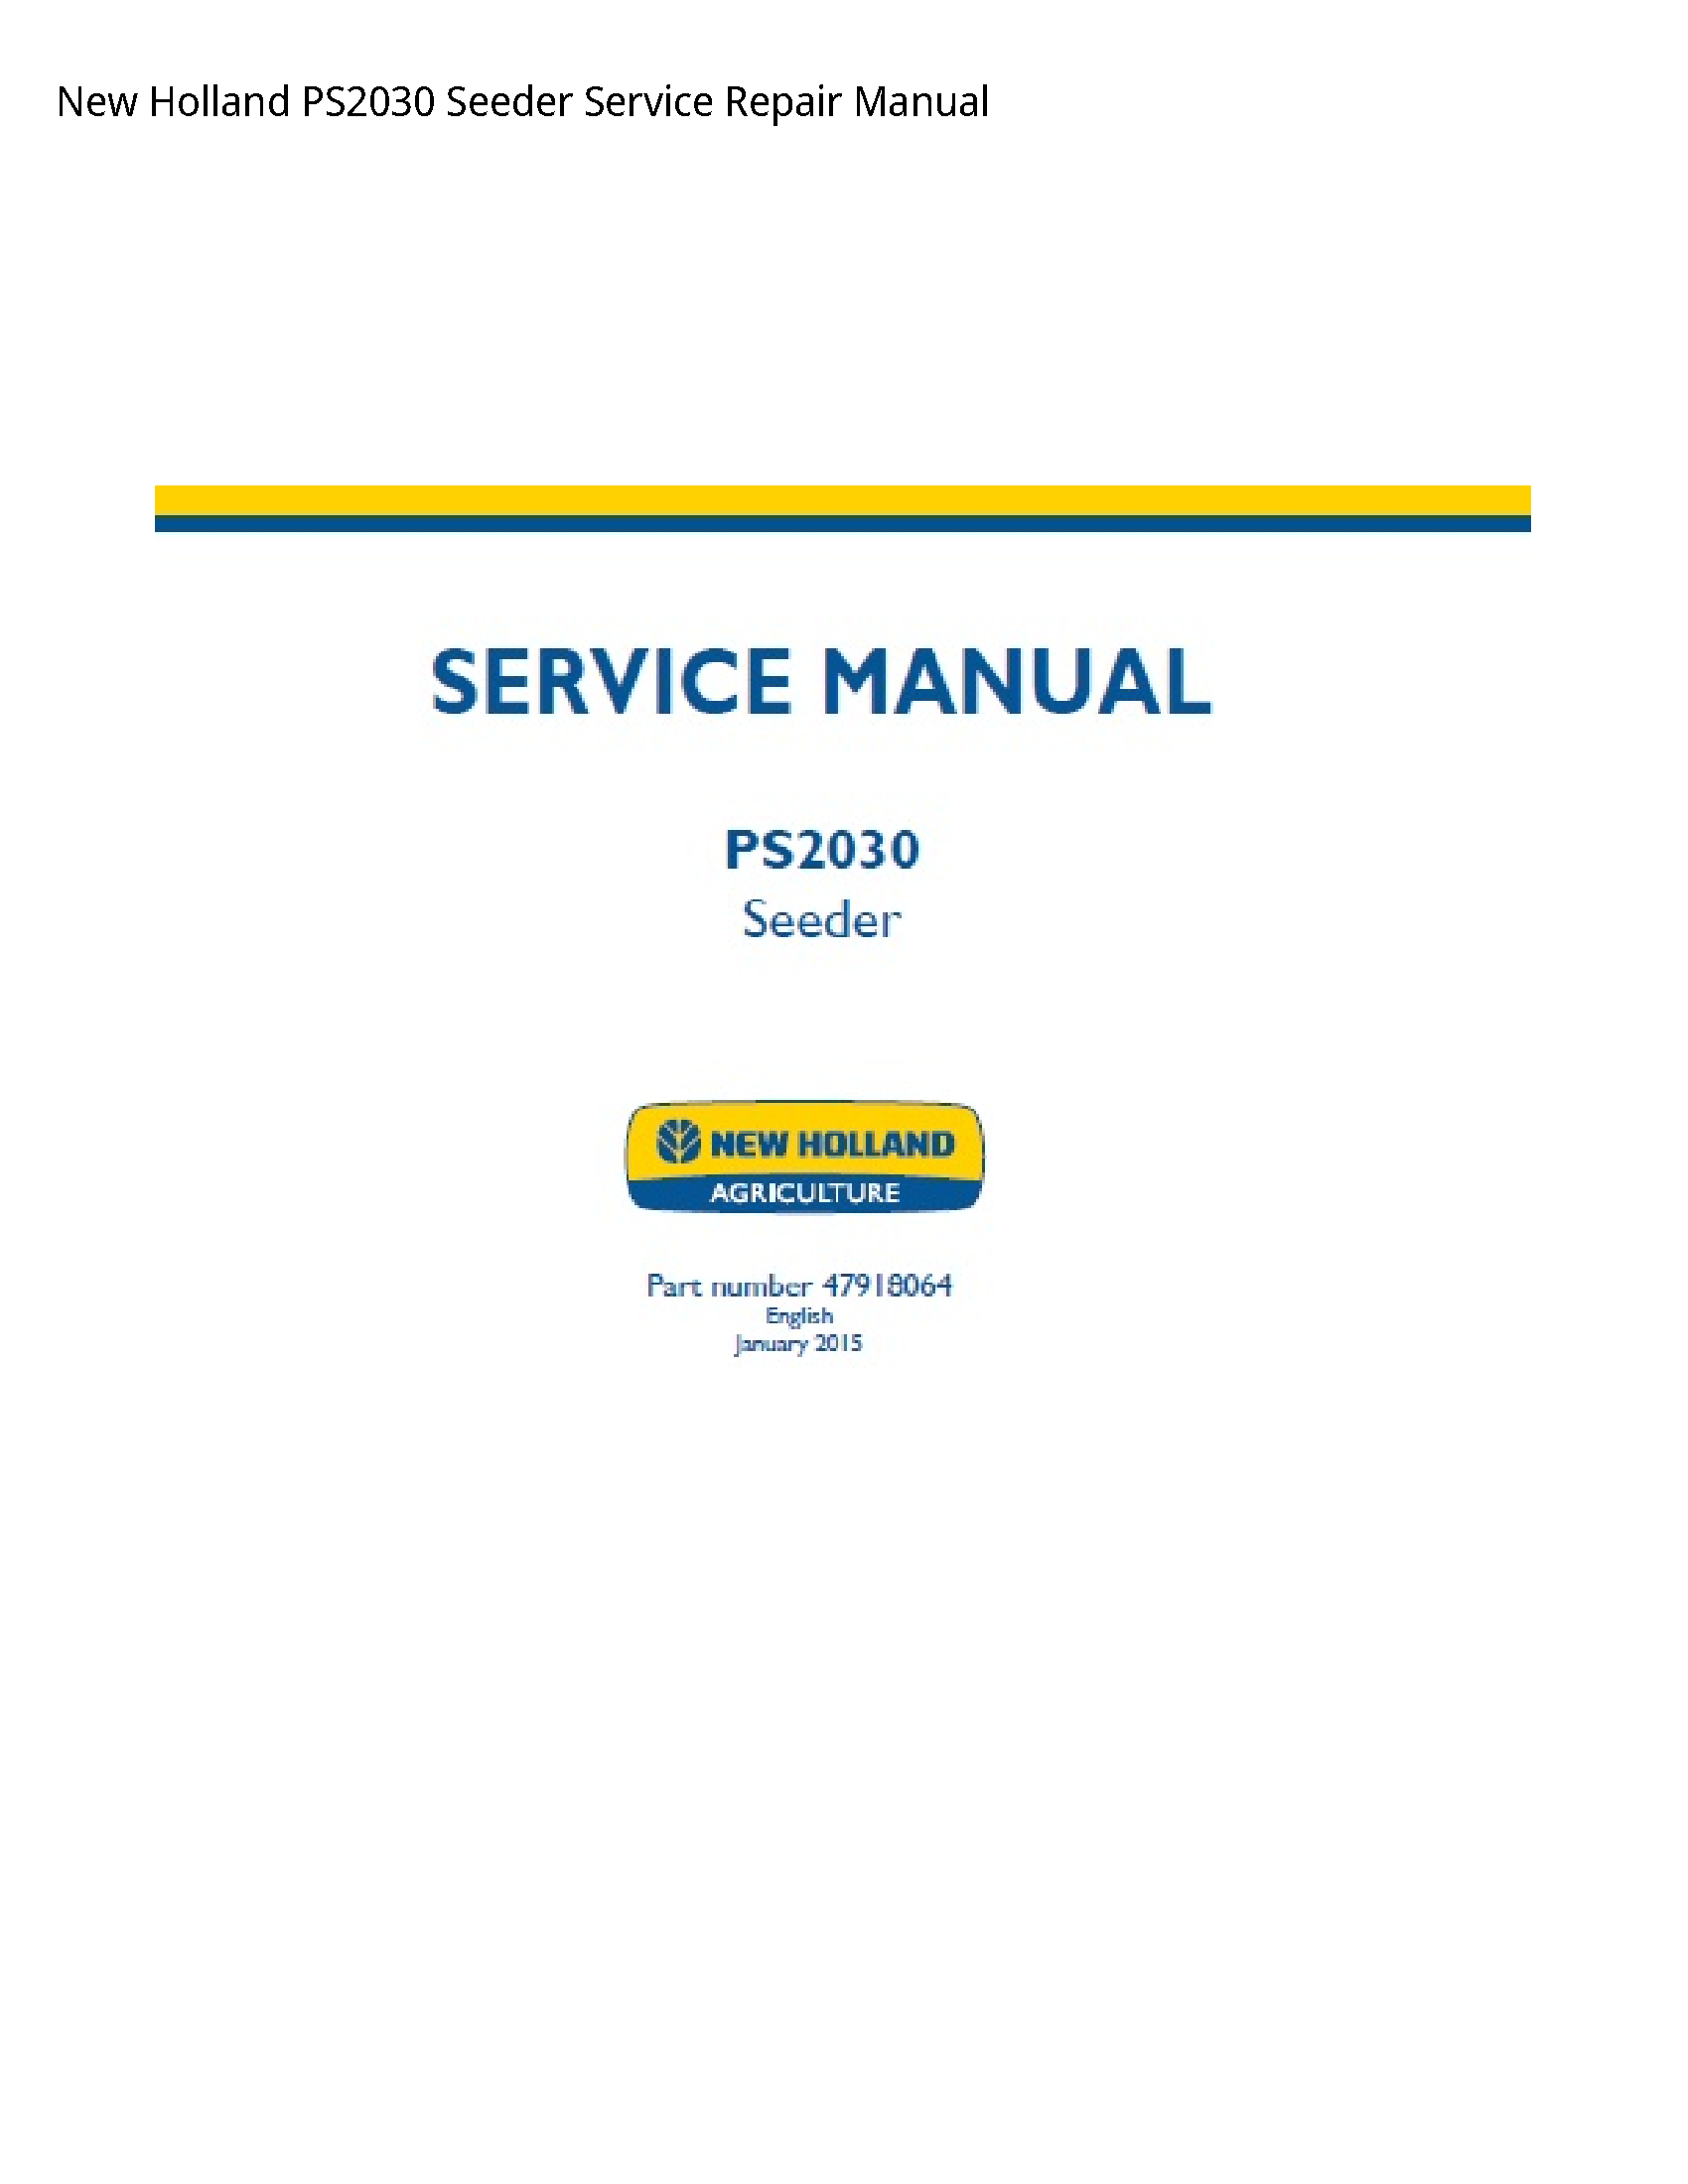 New Holland PS2030 Seeder manual